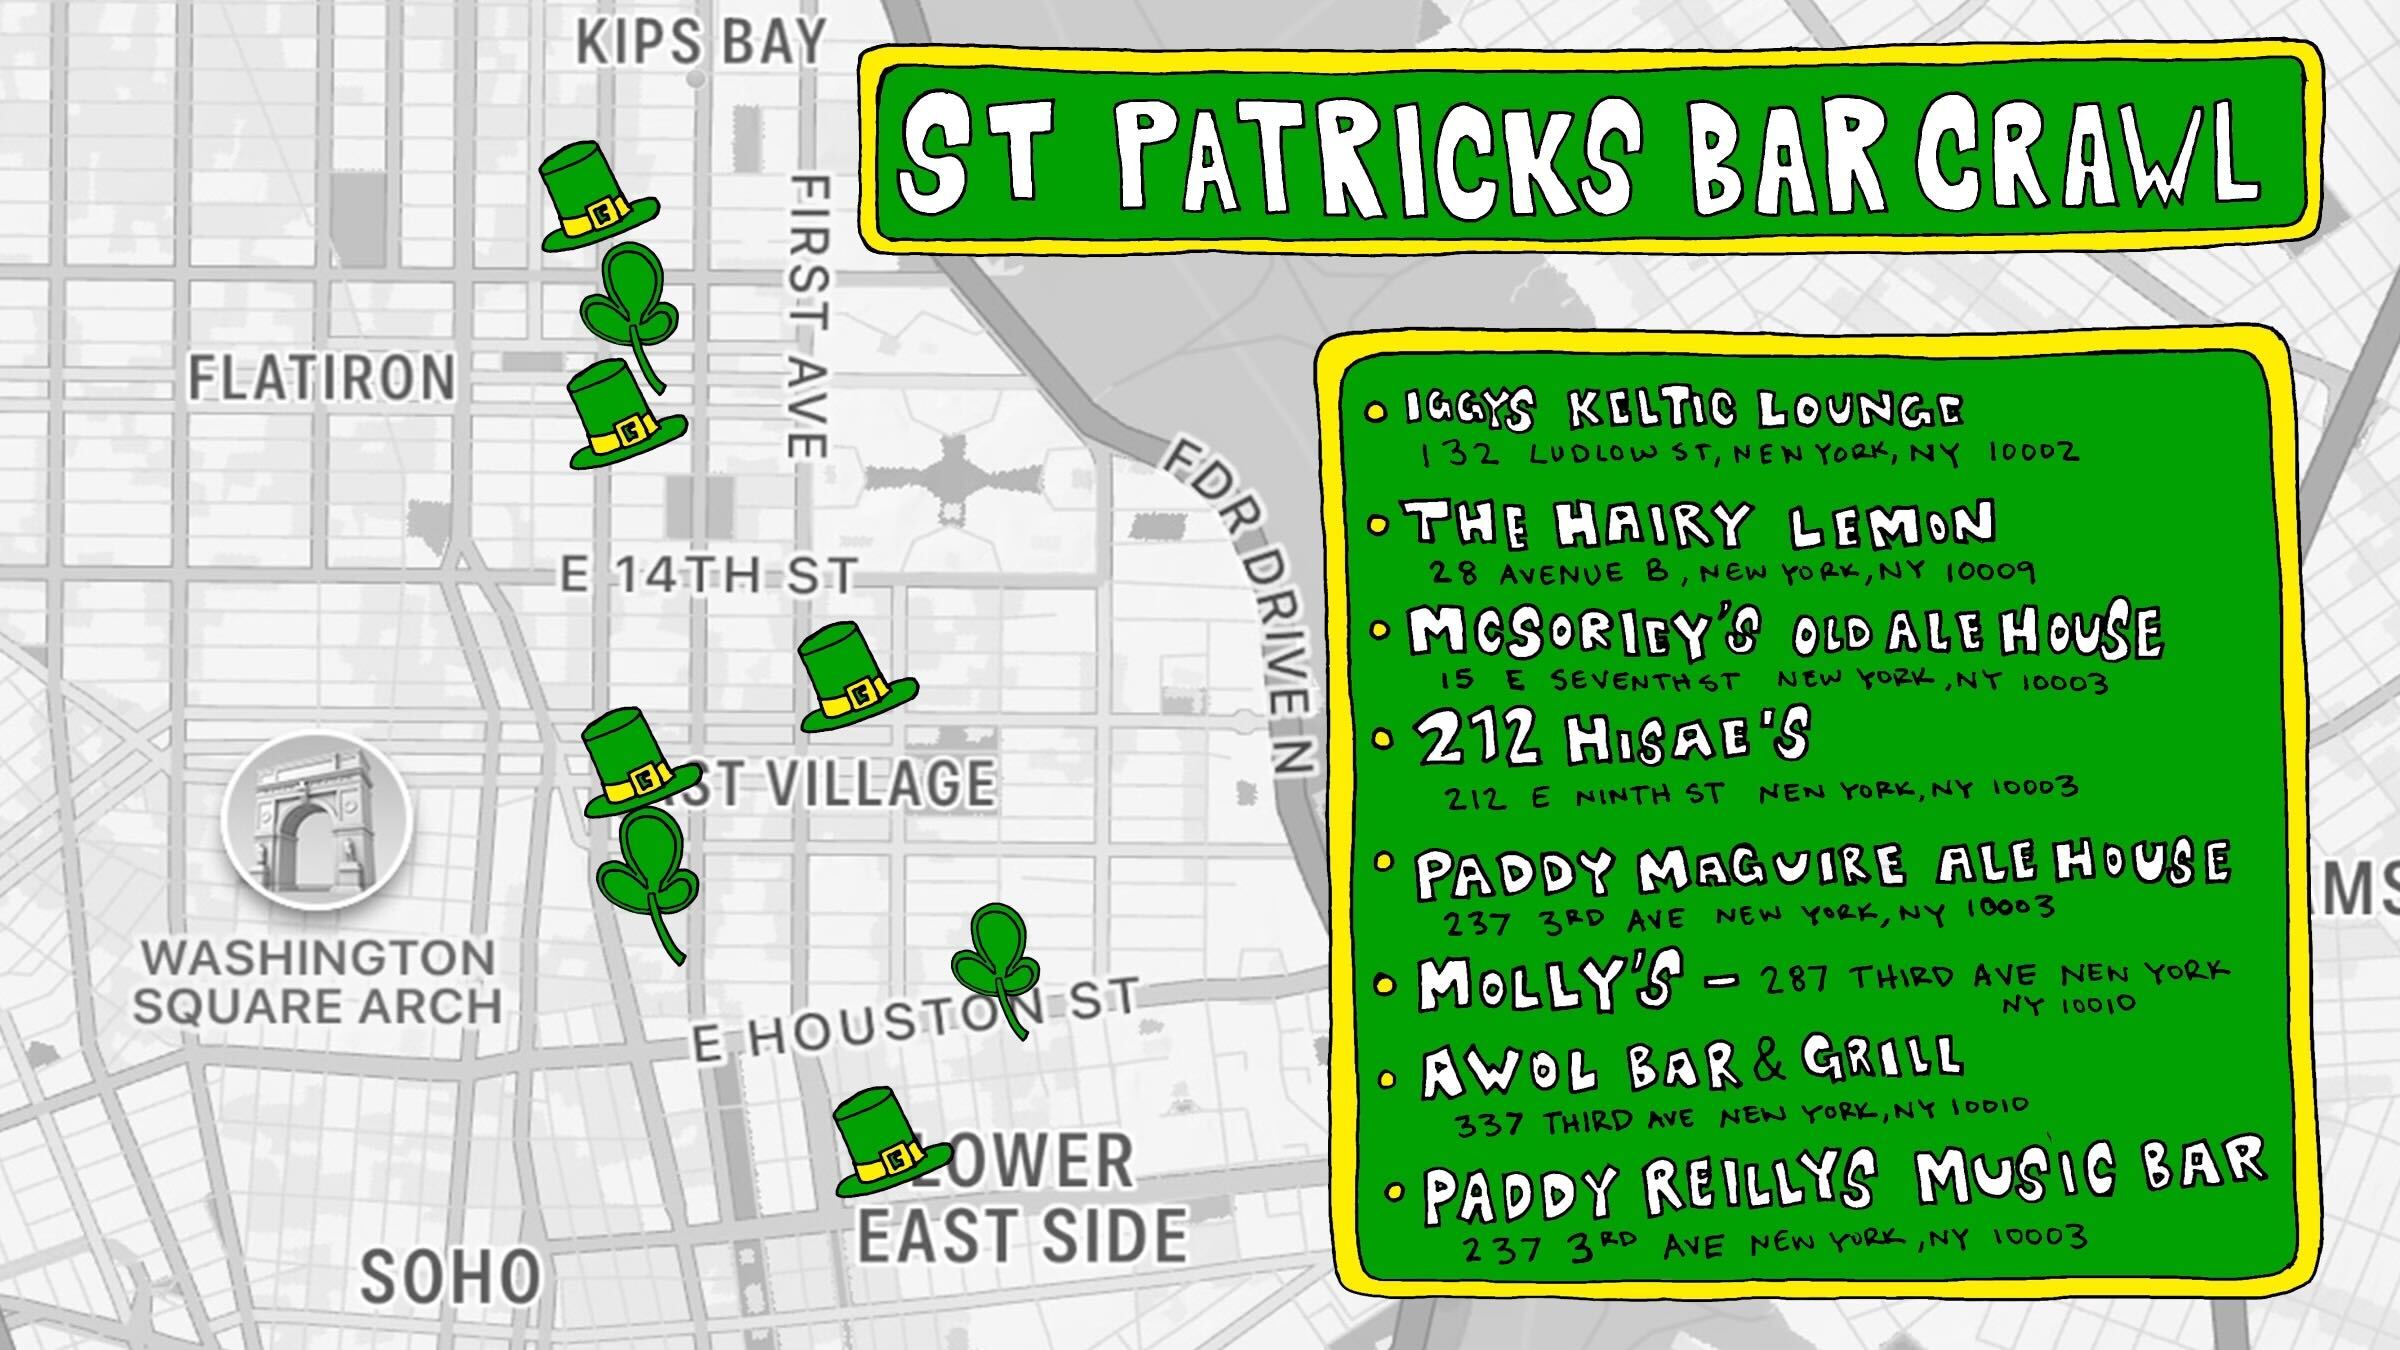 Map of east Manhattan, from Kips Bay to the Lower East Side, with green and yellow title that says "St Patrick's Bar Crawl." 8 bars are listed on the left, and are pinned on the map with green hats to the right.